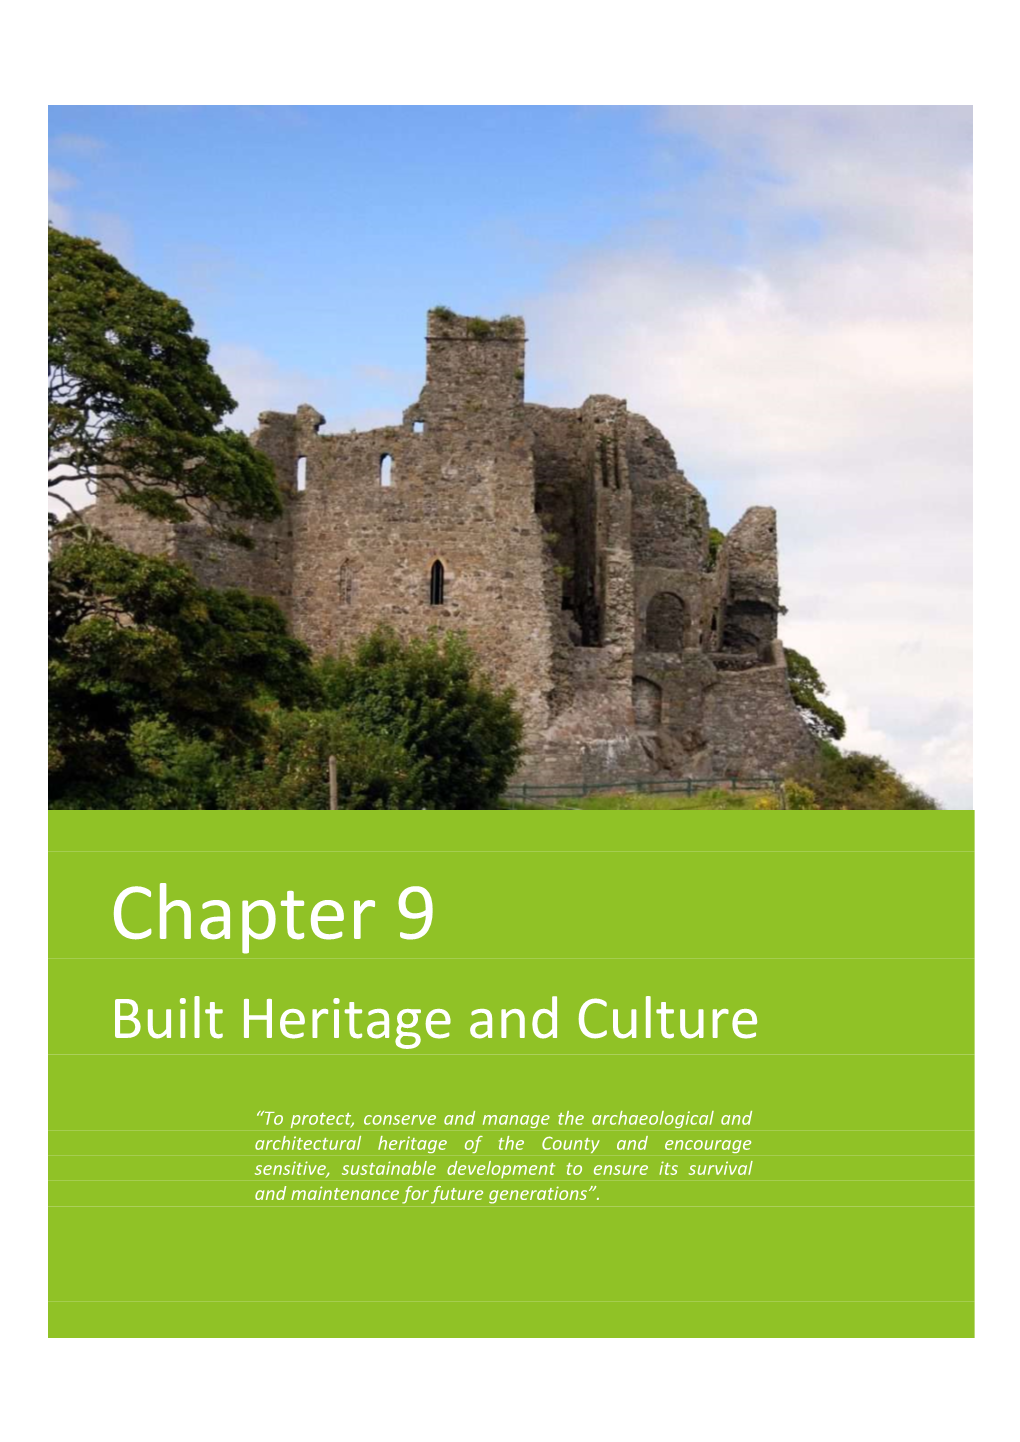 Chapter 9 Built Heritage and Culture